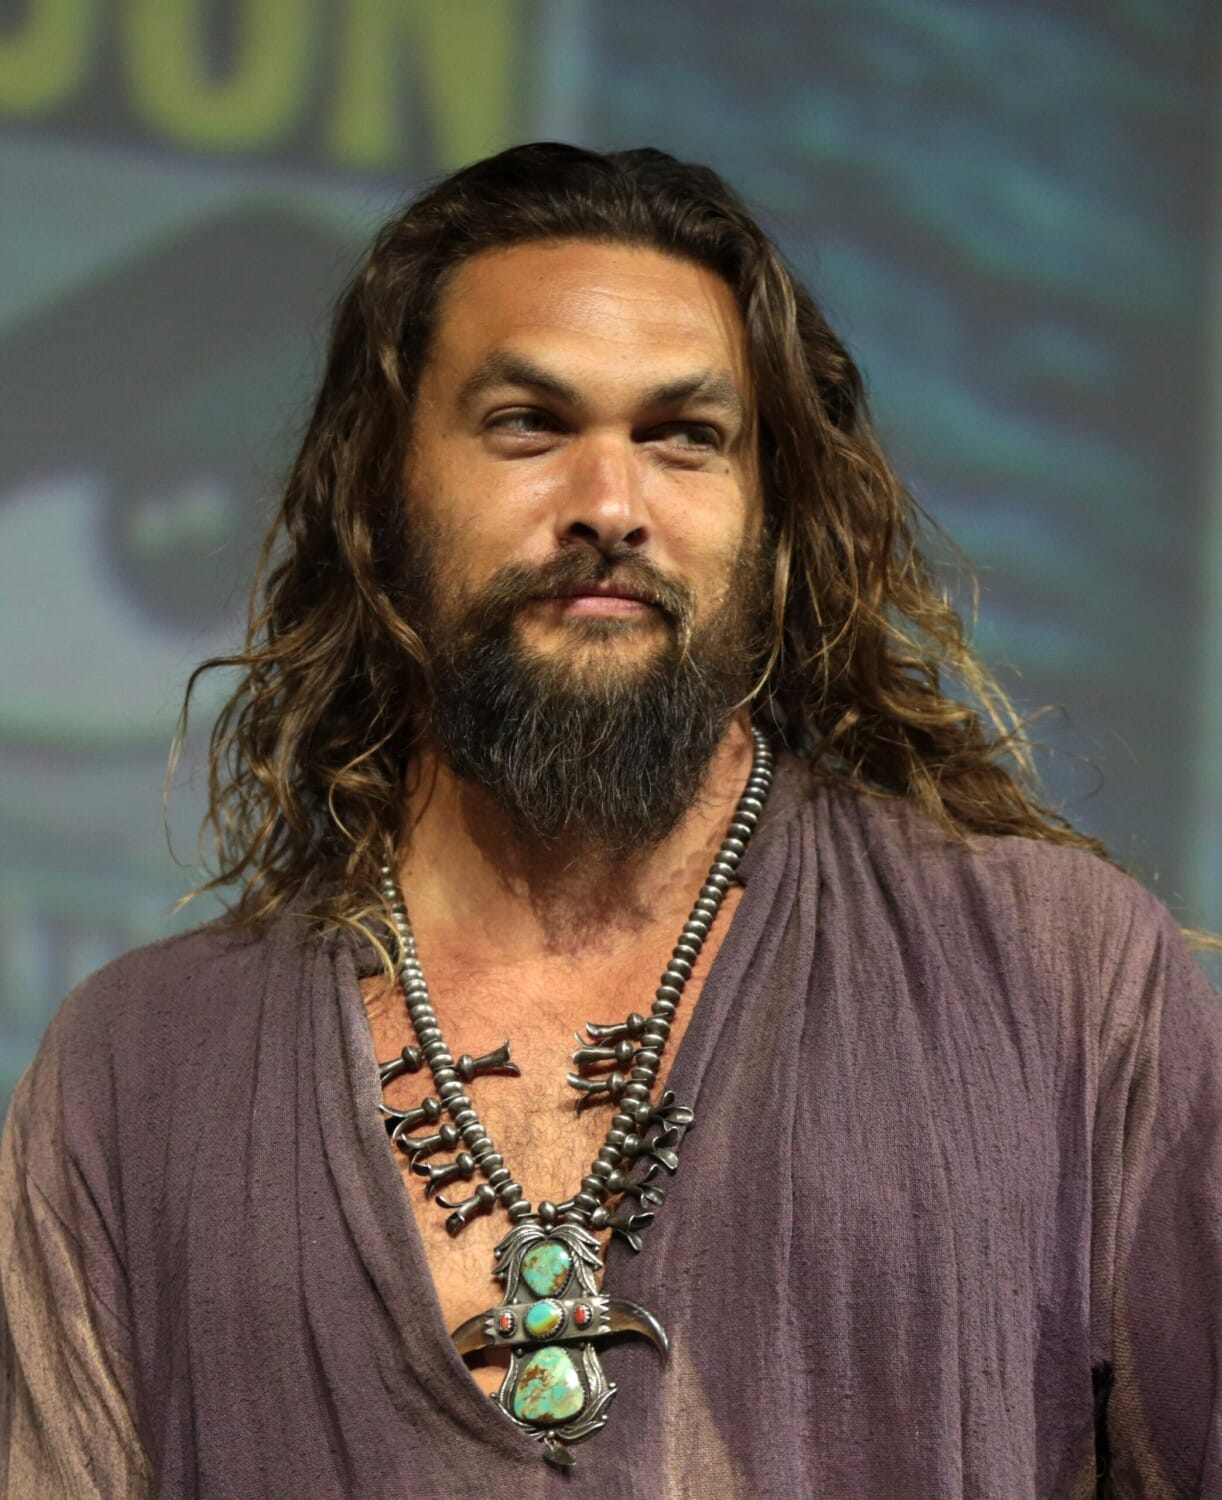 Jason Momoa. By Gage Skidmore from Peoria, AZ, United States of America - Jason Momoa, CC BY-SA 2.0, https://commons.wikimedia.org/w/index.php?curid=94225810